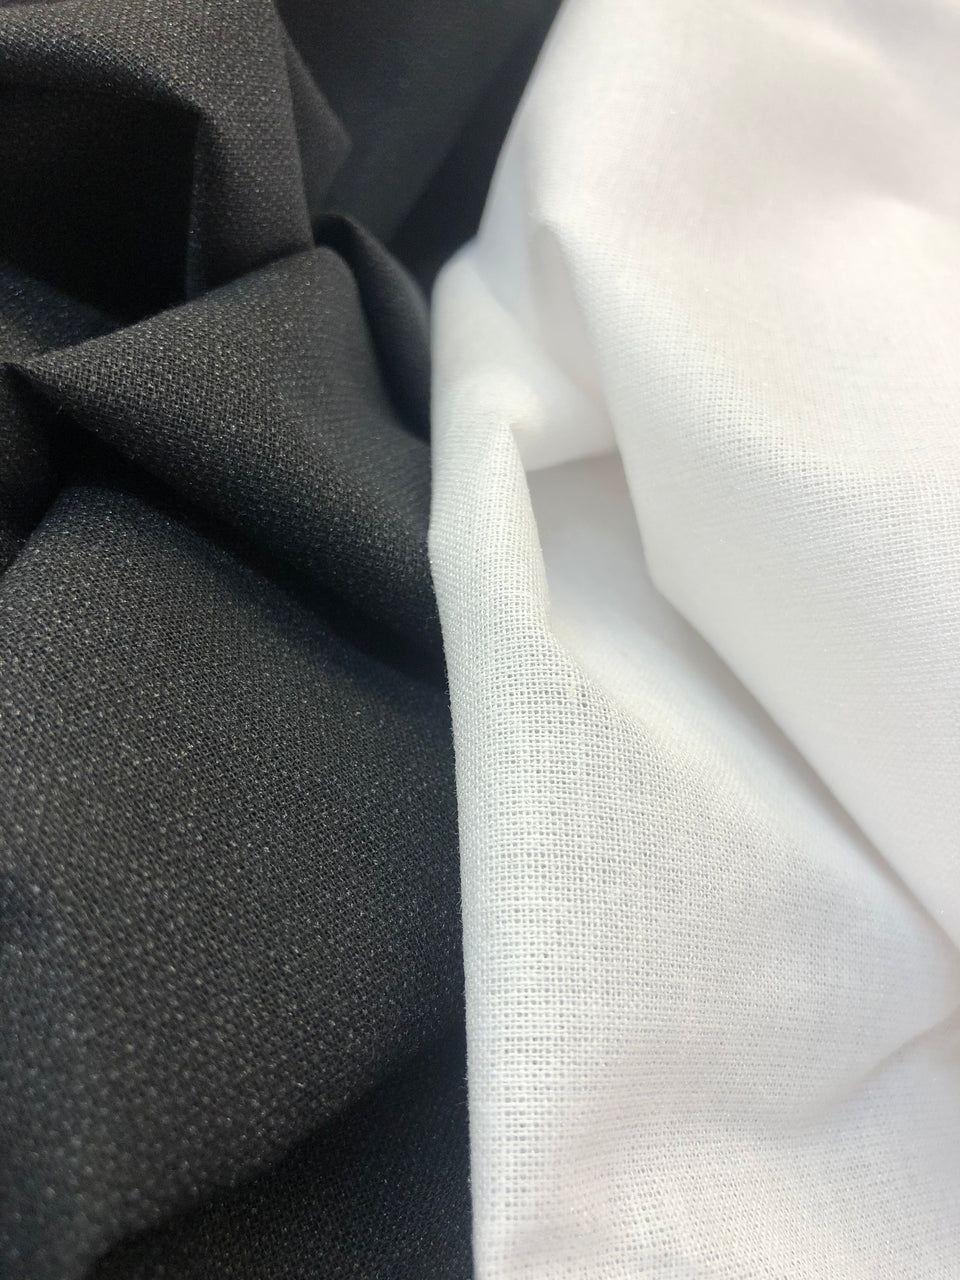 Black and white woven interfacing